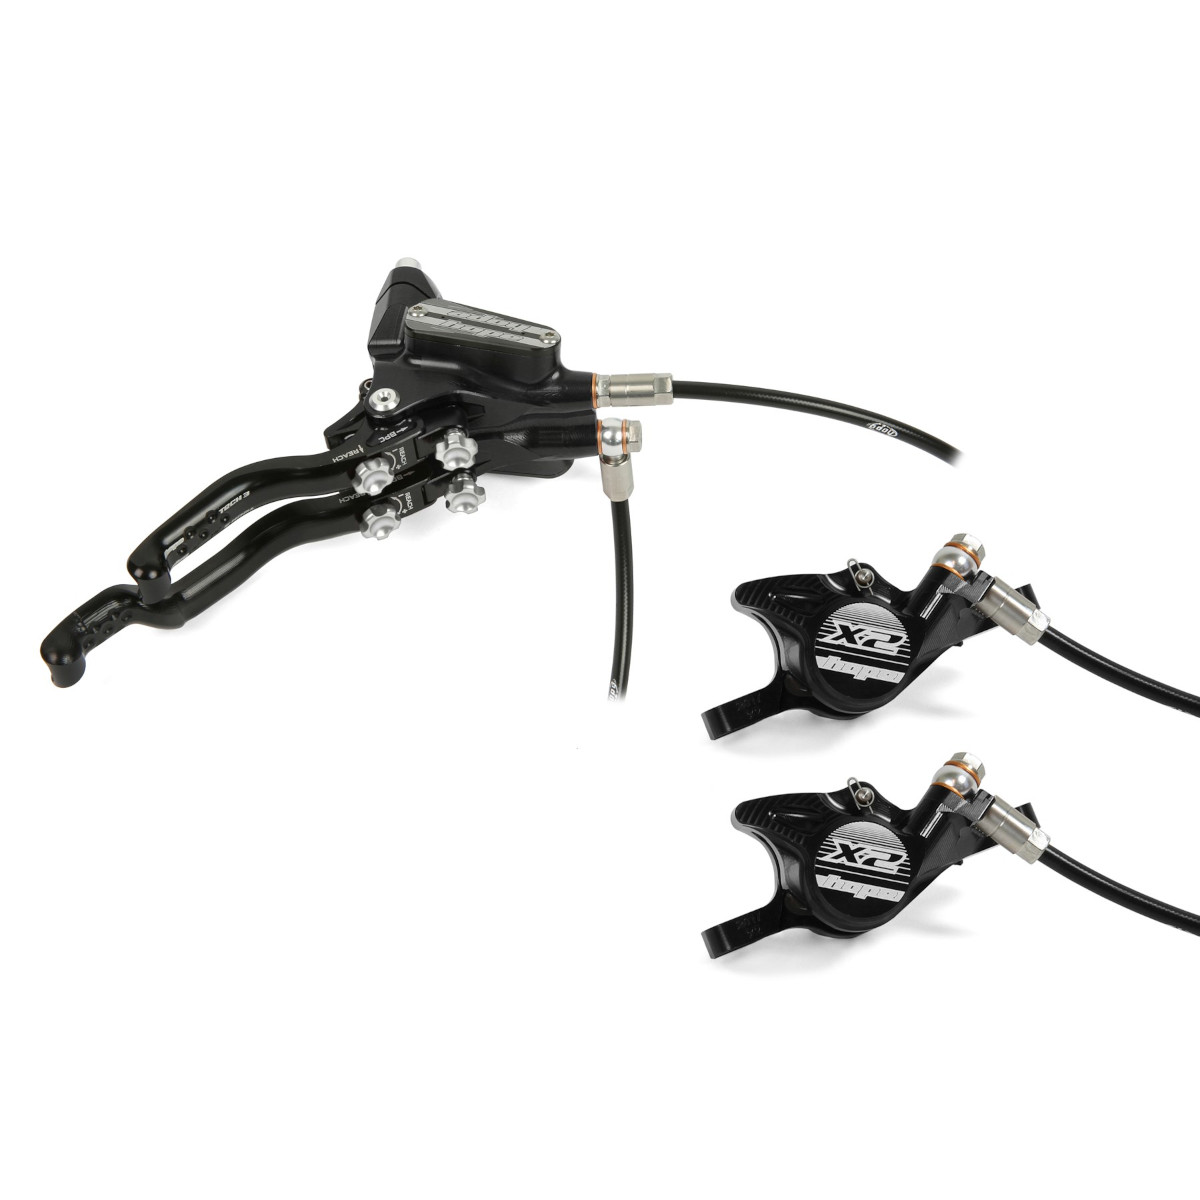 Picture of Hope Tech 3 X2 Duo Disc Brake - black